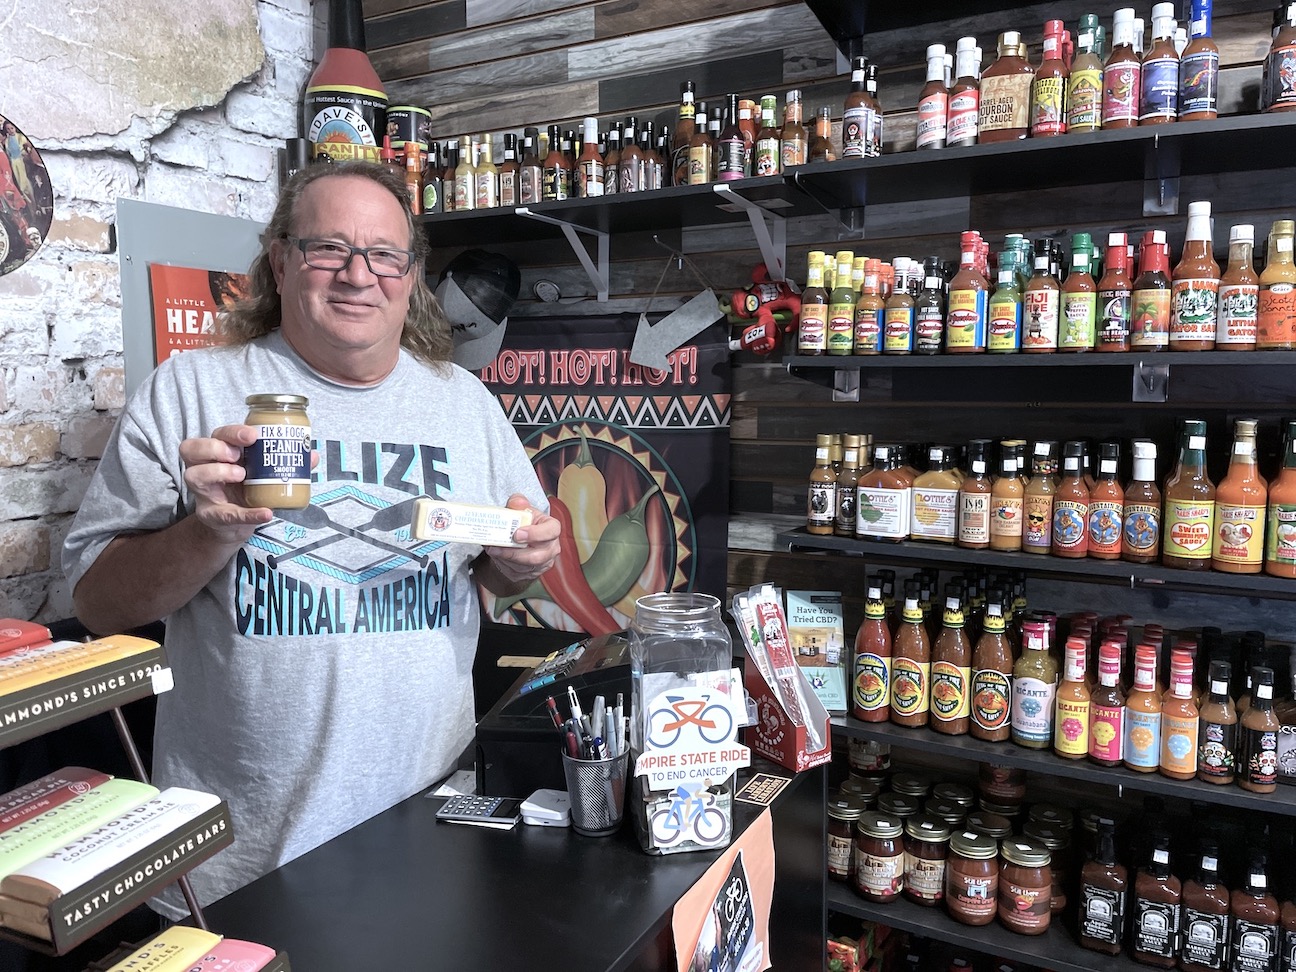 Sgt. Peppers owner Neil Garfinkel poses with some of the `Etc.` items offered in his store.